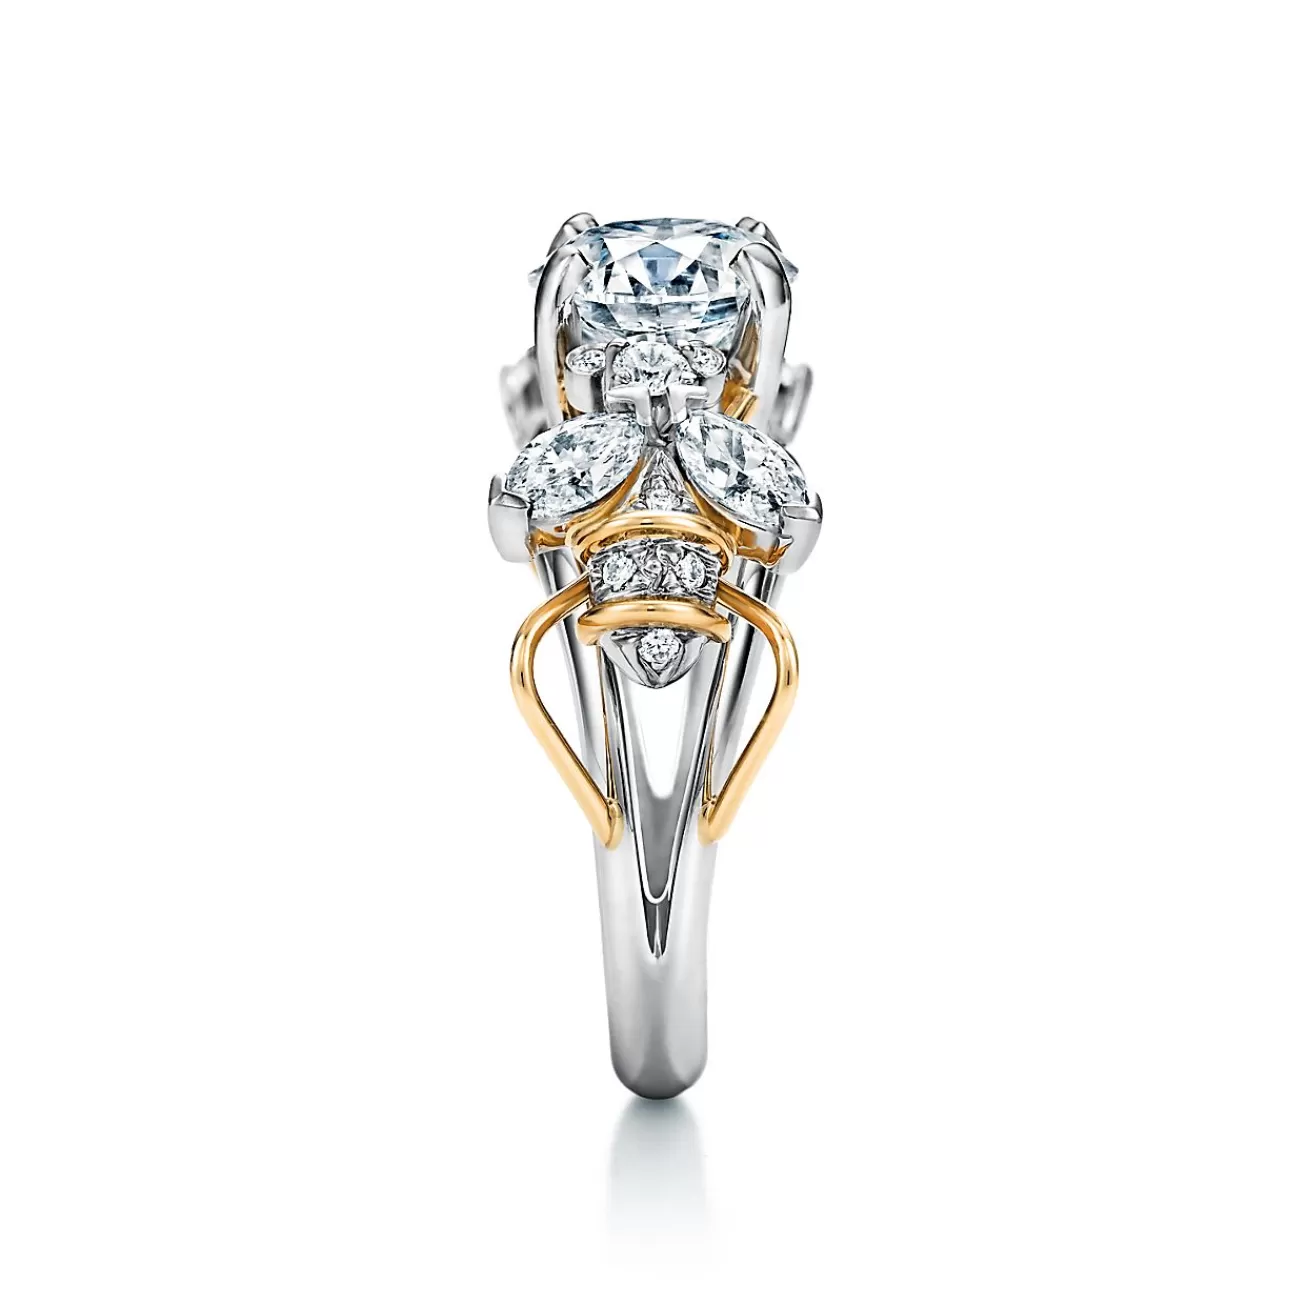 Tiffany & Co. Schlumberger by ™ Two Bees engagement ring in platinum and 18k gold | ^ Jean Schlumberger by Tiffany | Engagement Rings